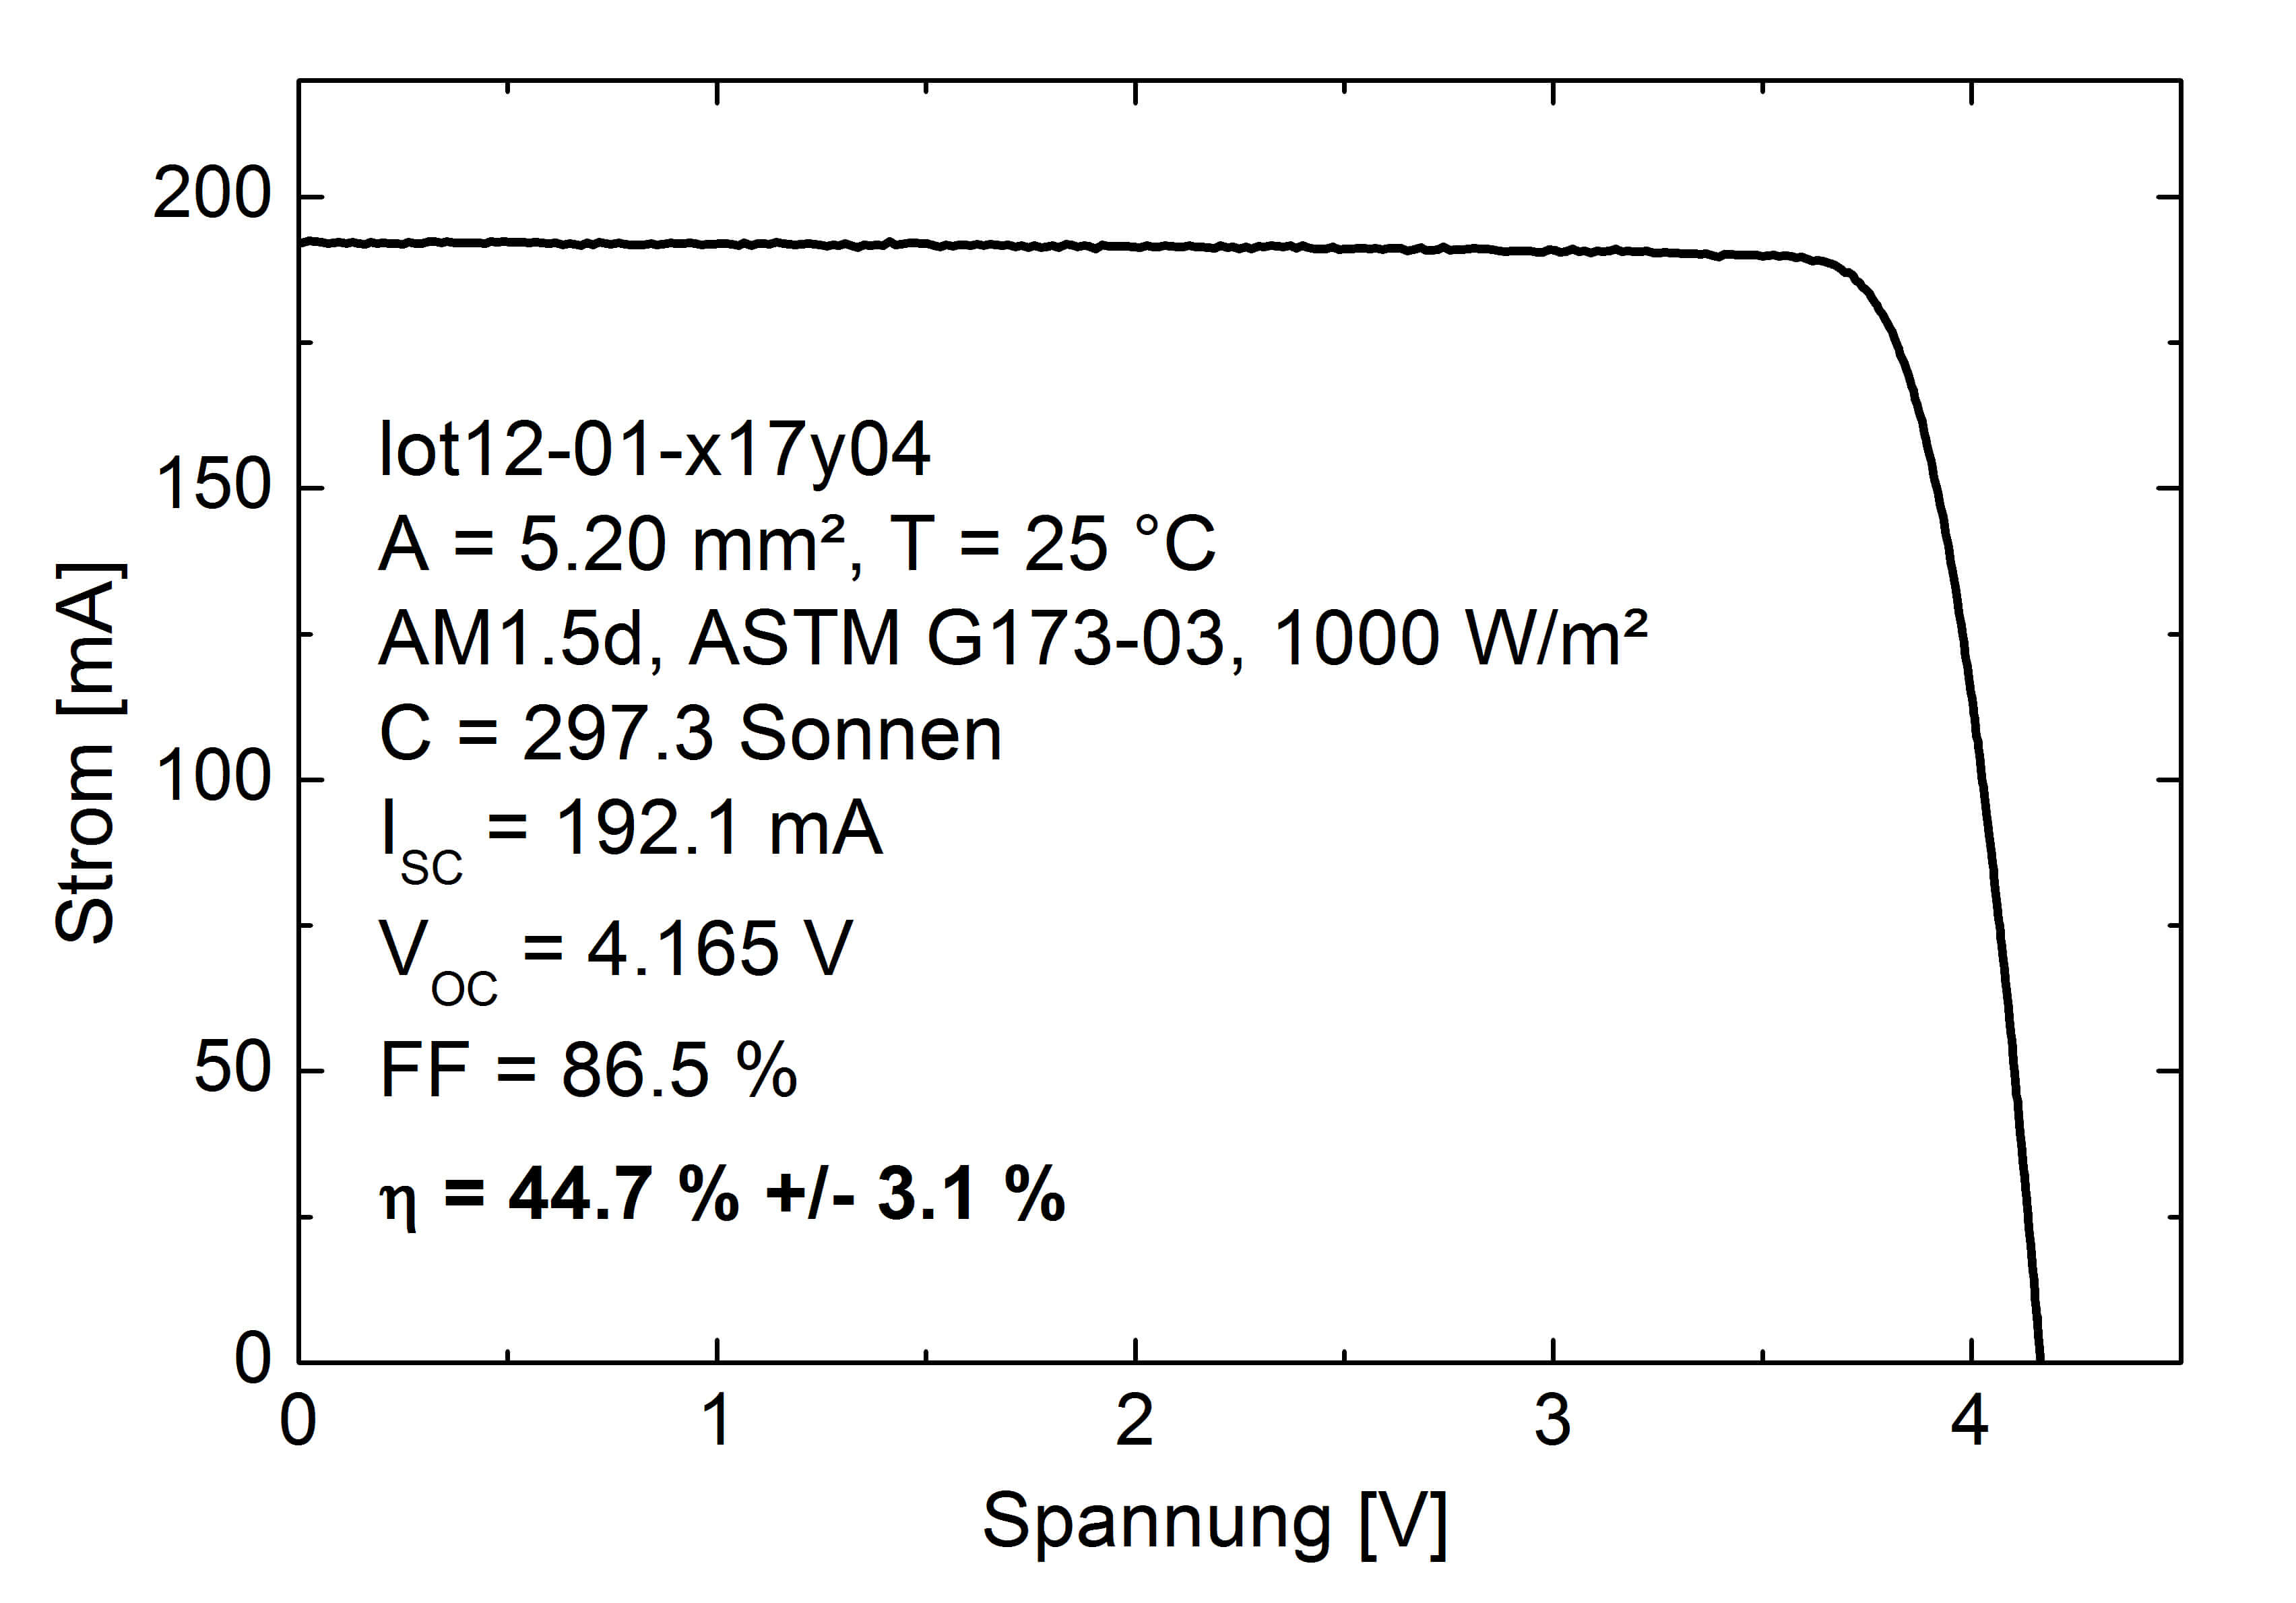 IV-characteristics of the currently best four-junction solar cell under the AM1.5d ASTM G173-03 spectrum at a concentration ration of 319 suns. The measurement was performed at the Fraunhofer ISE CalLab.